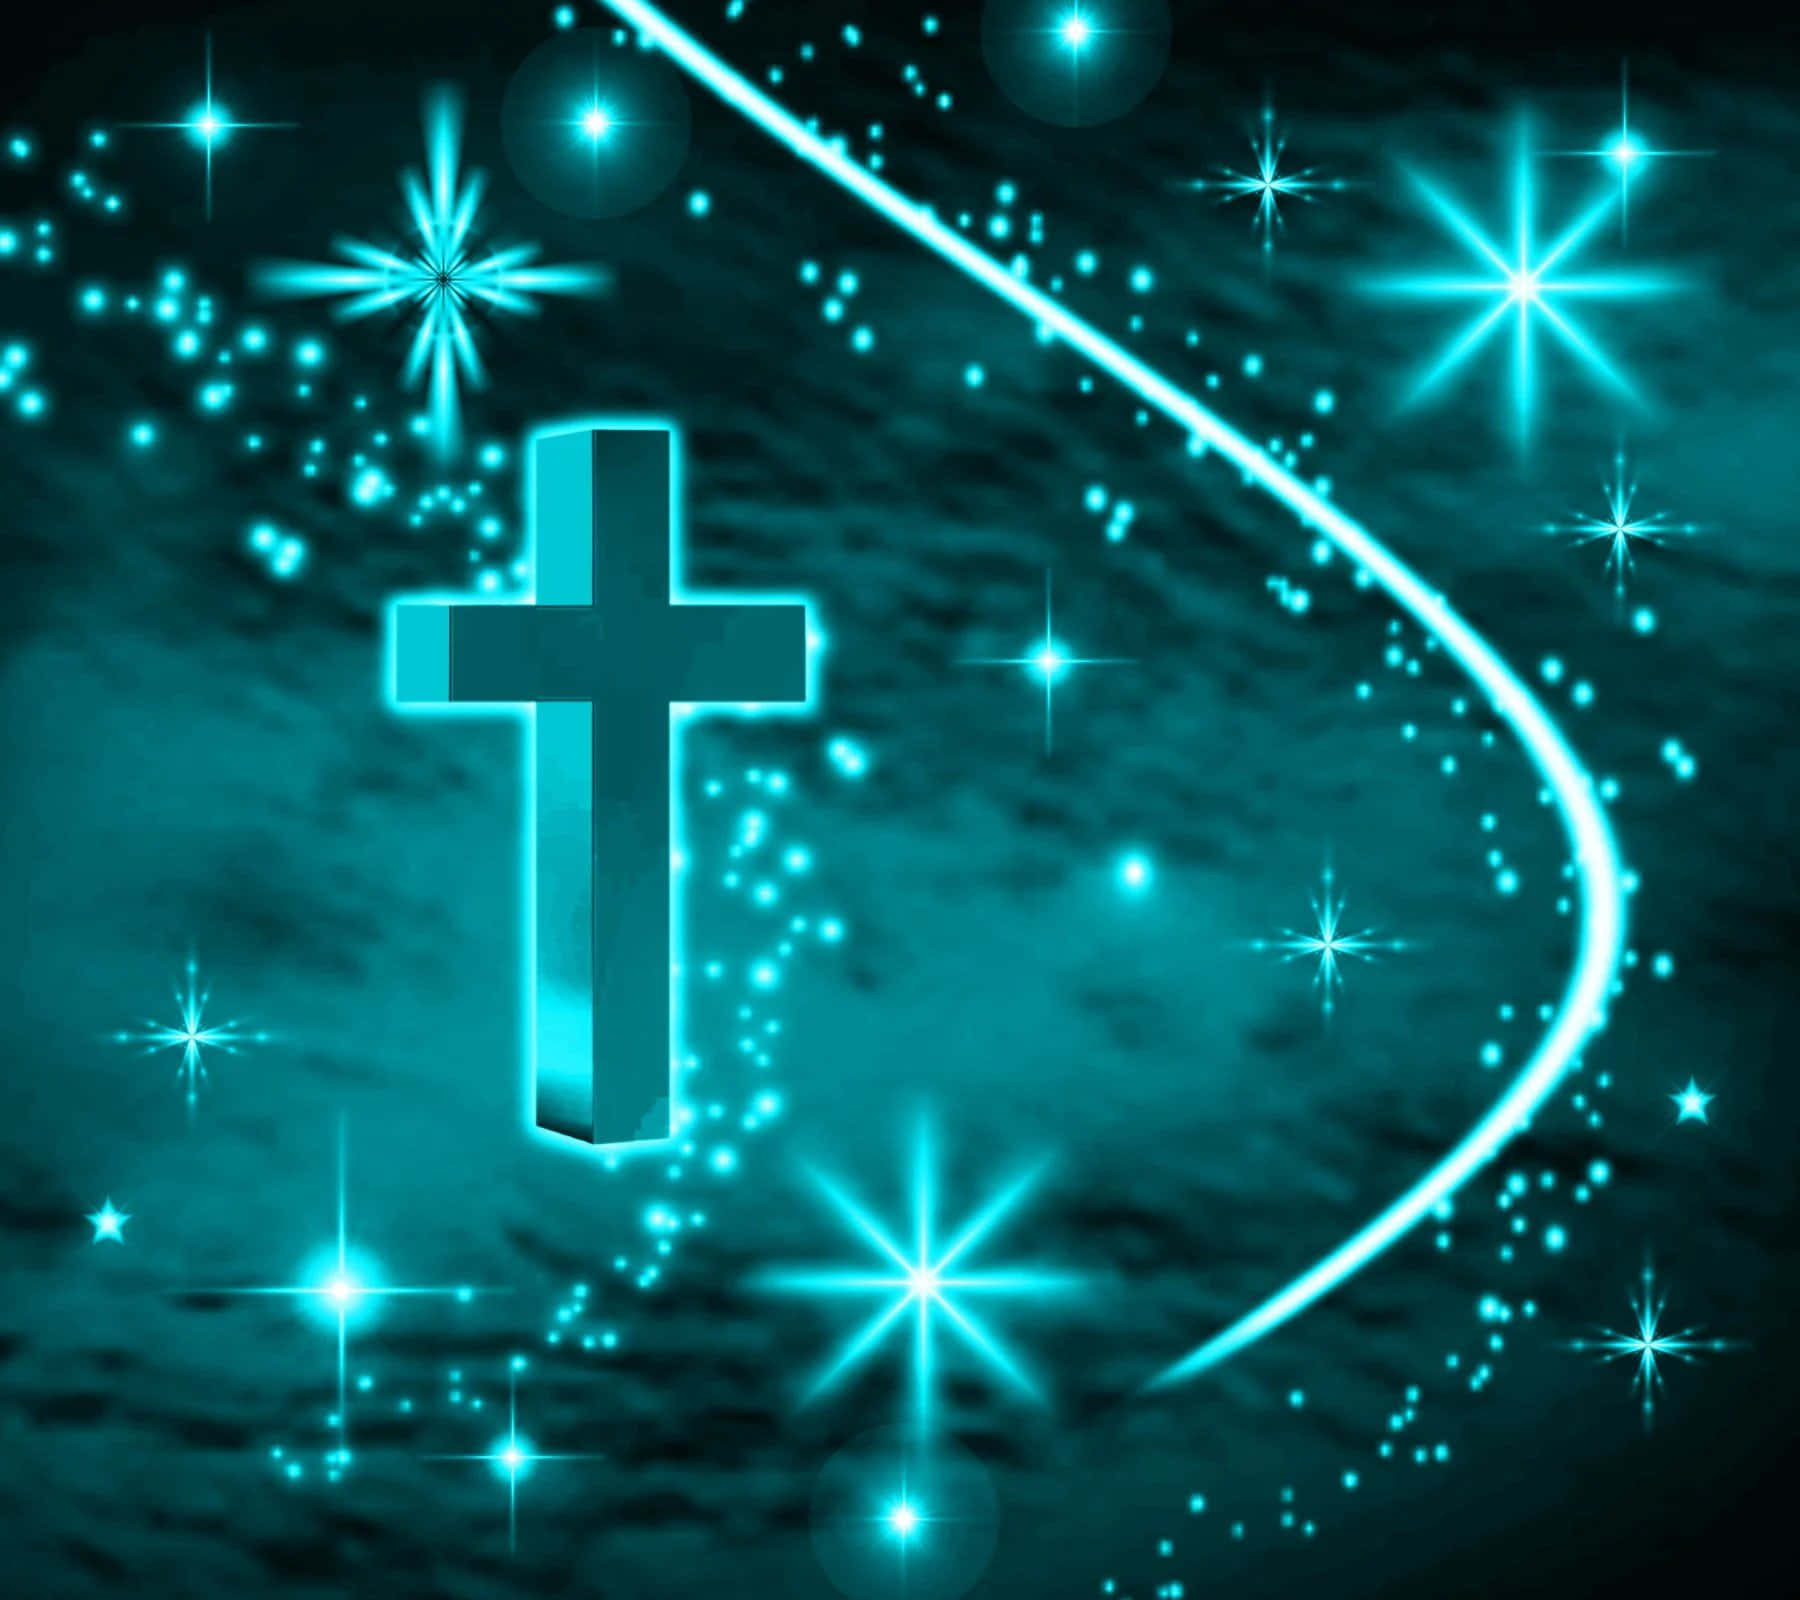 Majestic Cool Cross on a Blue Glowing Background Wallpaper